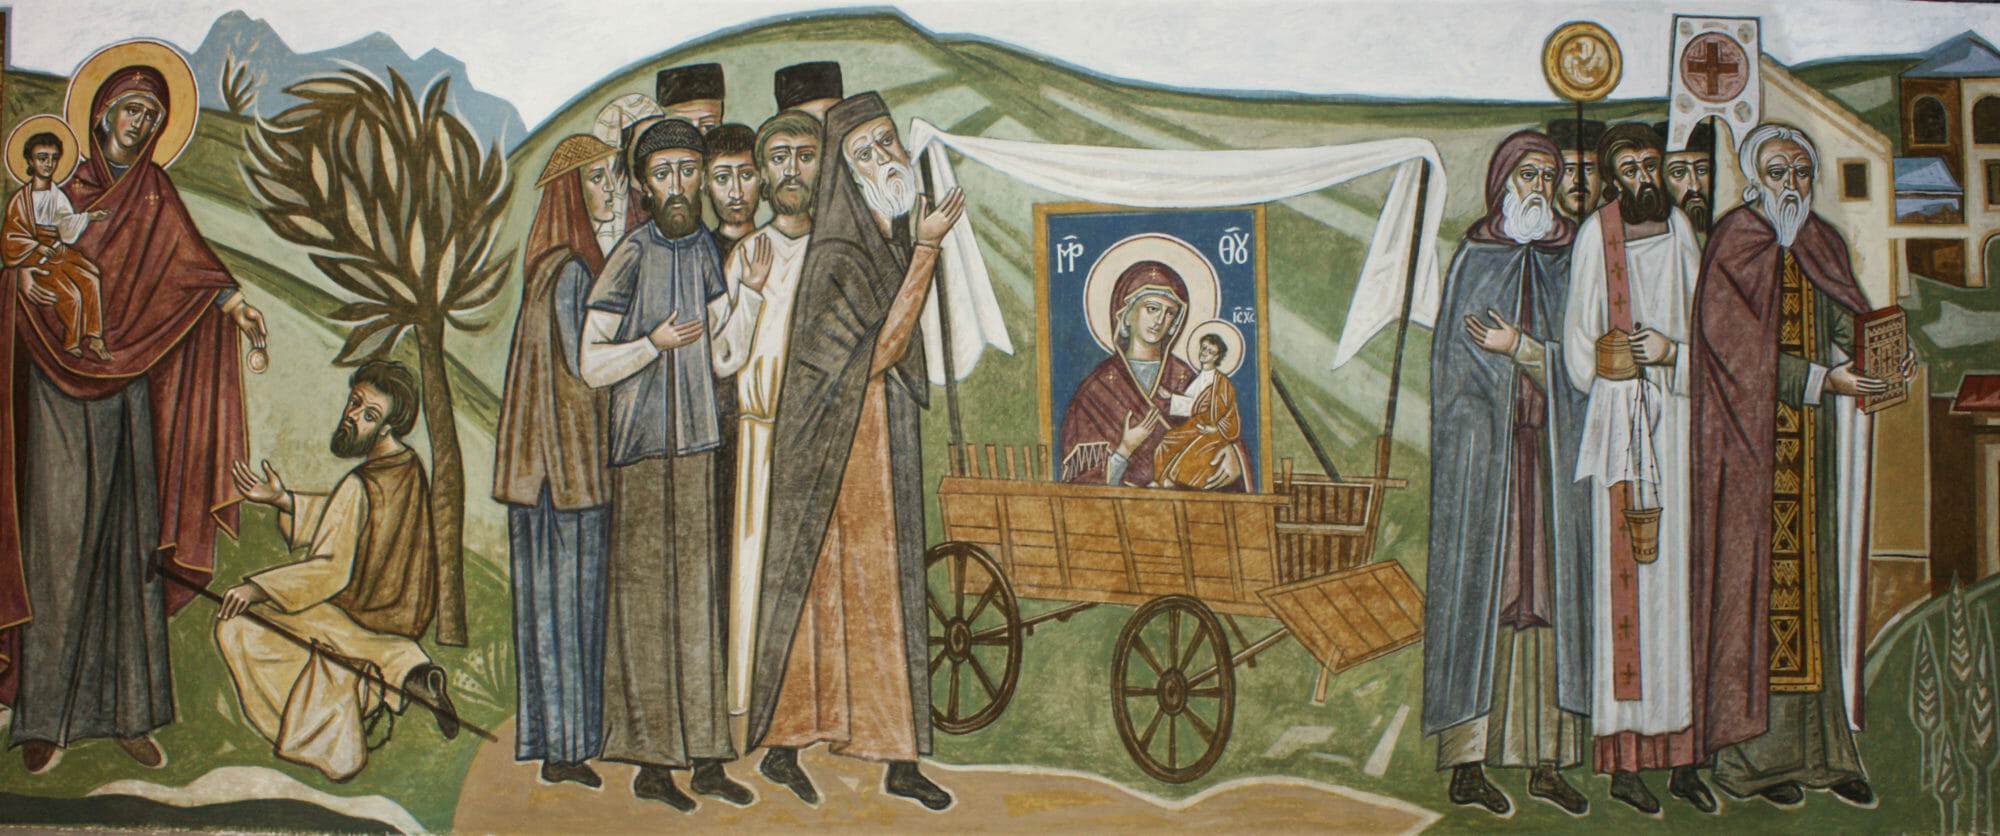 Markos Kampanis, scene from "The story of the icon of the Portaitissa," mural at the convent of the Virgin Mary, Kornofolia, Greece, 2014.